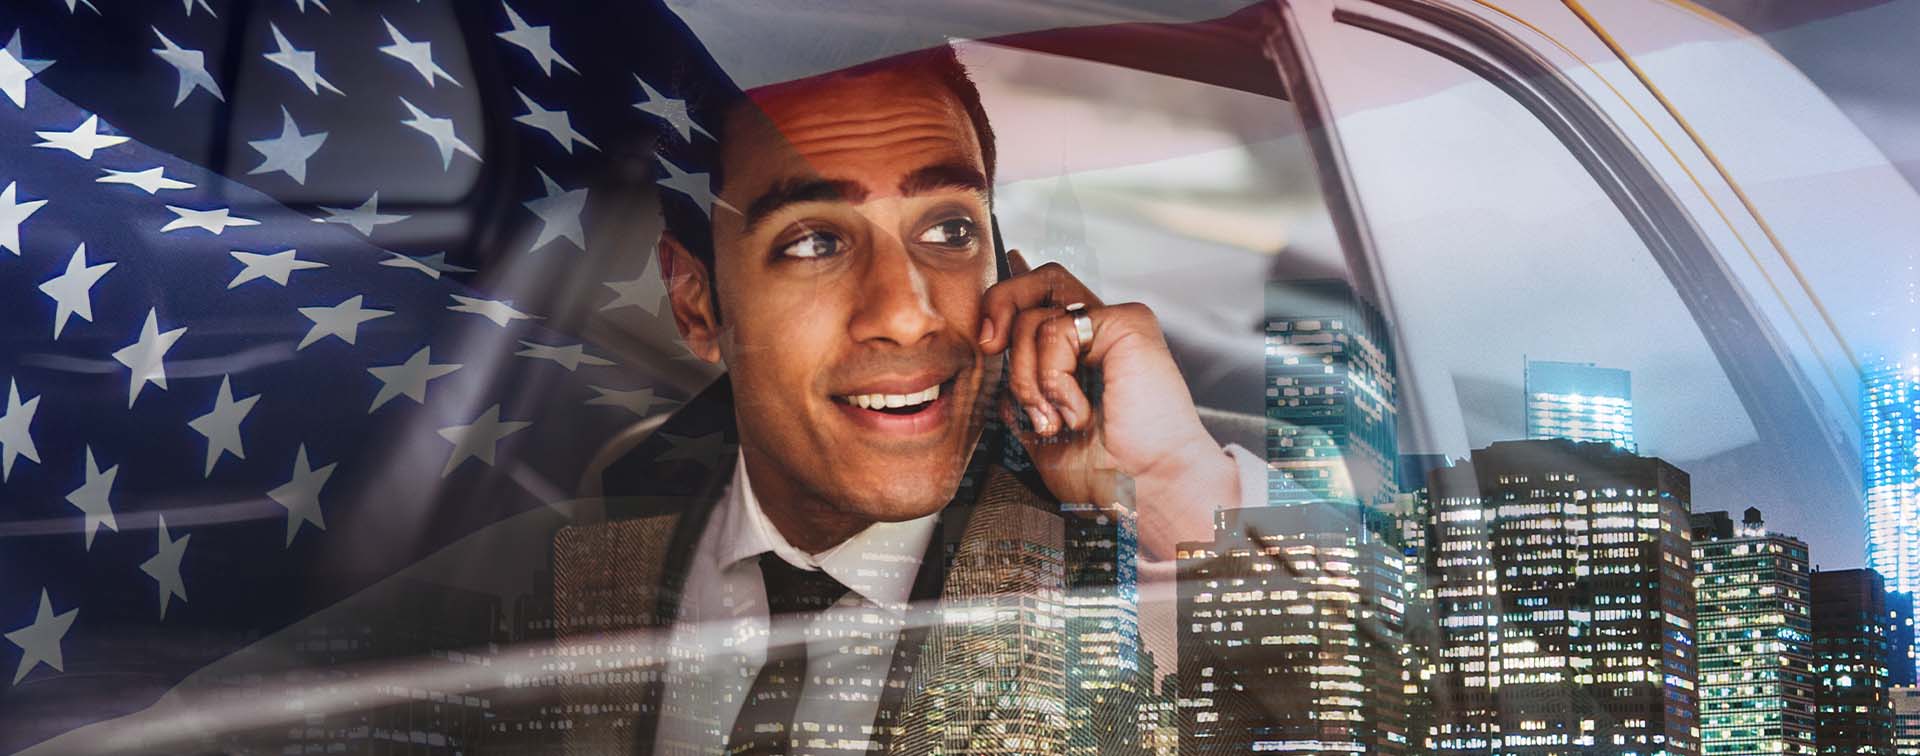 Businessman in a suit on mobile phone in cab with New York City buildings and US flag in the background